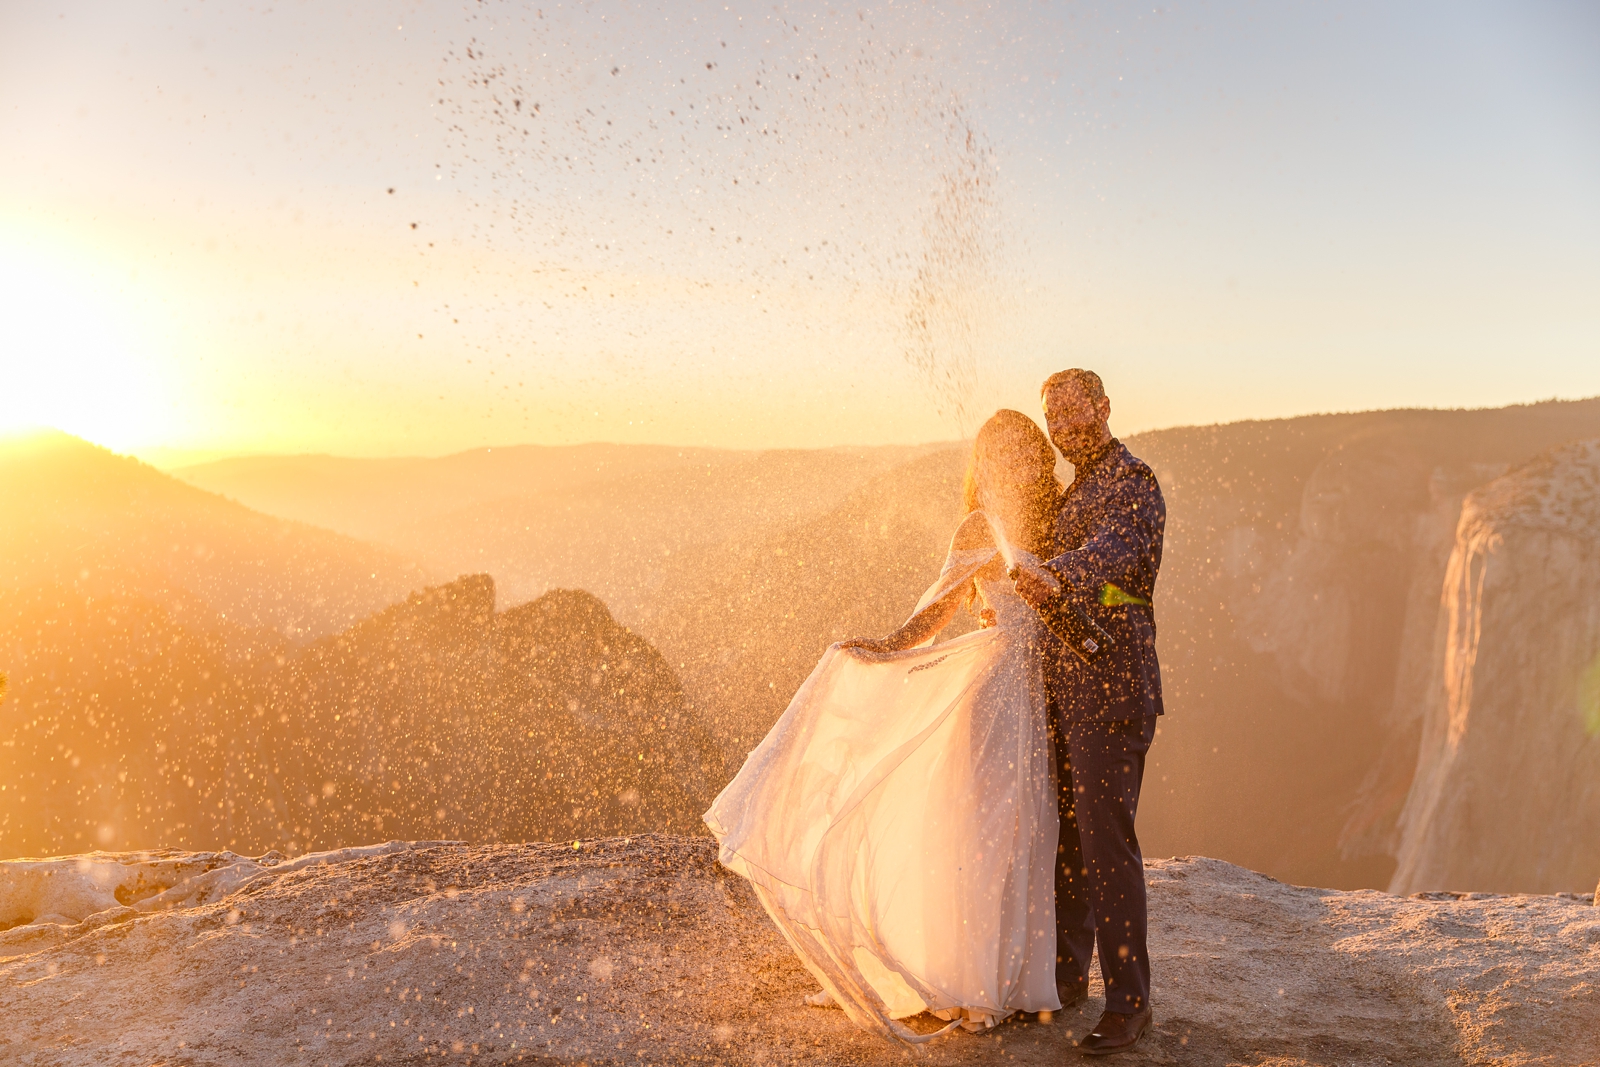 Dazzling champagne pop at this couple's Yosemite elopement.